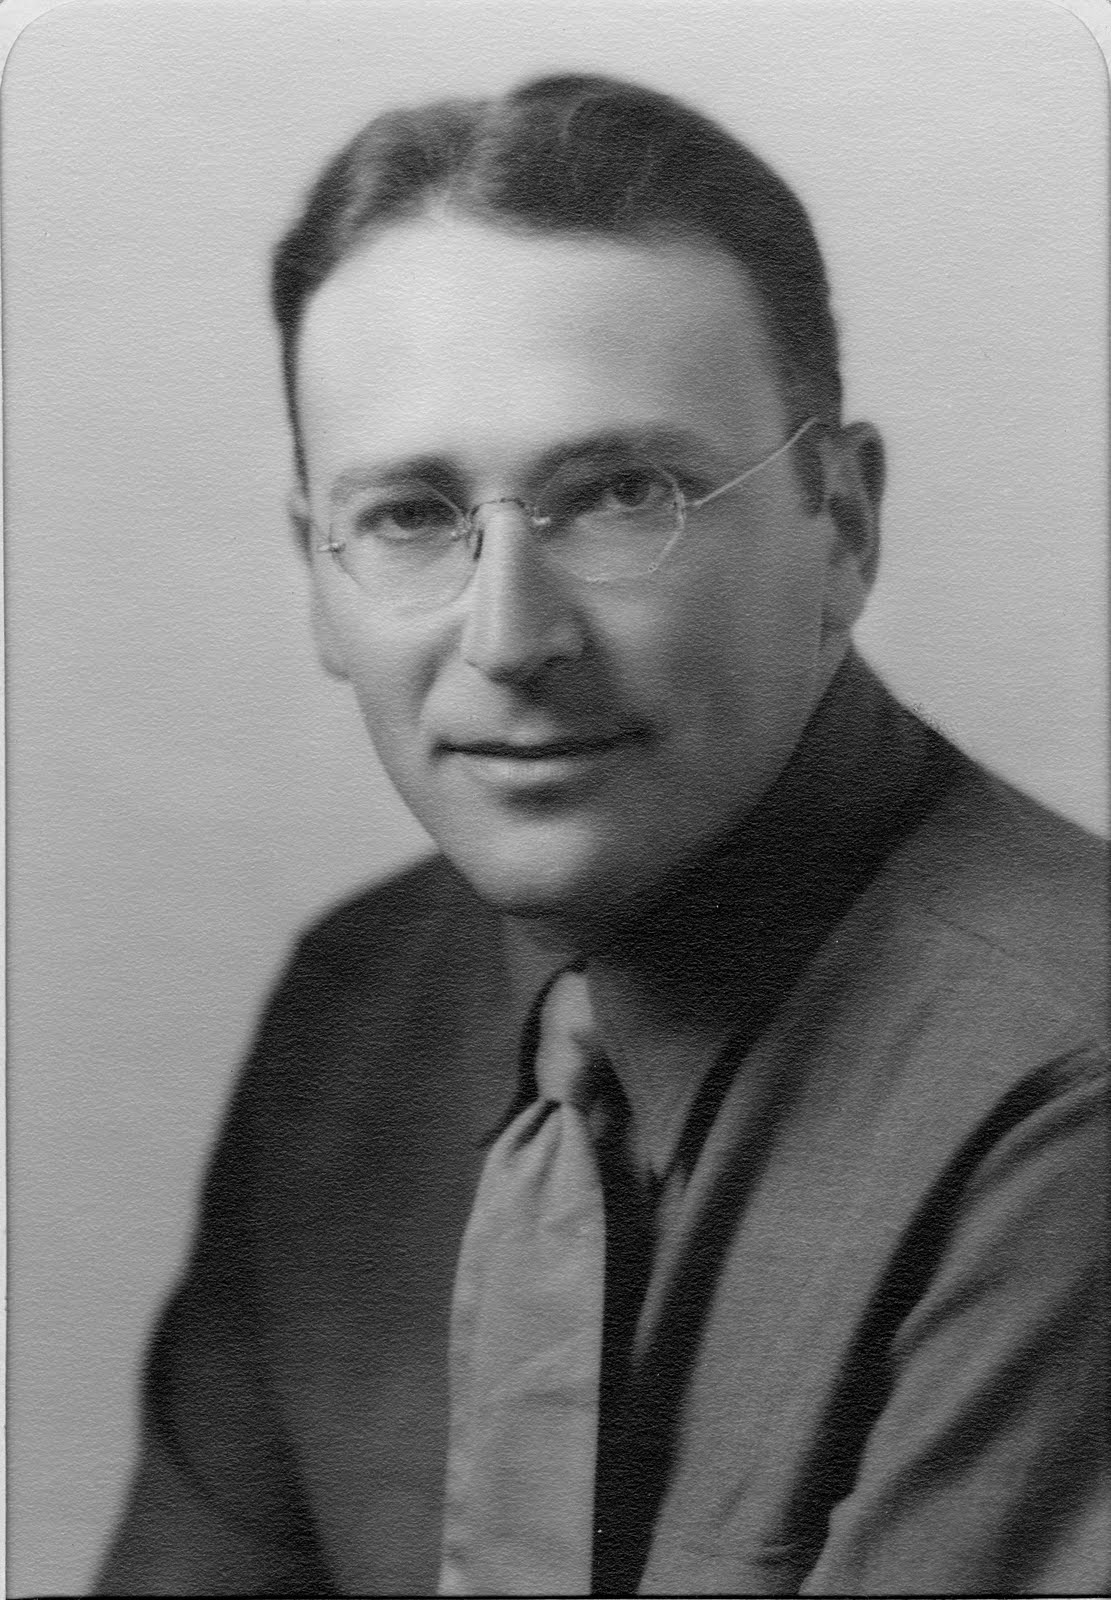 A photograph of Lewis S. Feuer